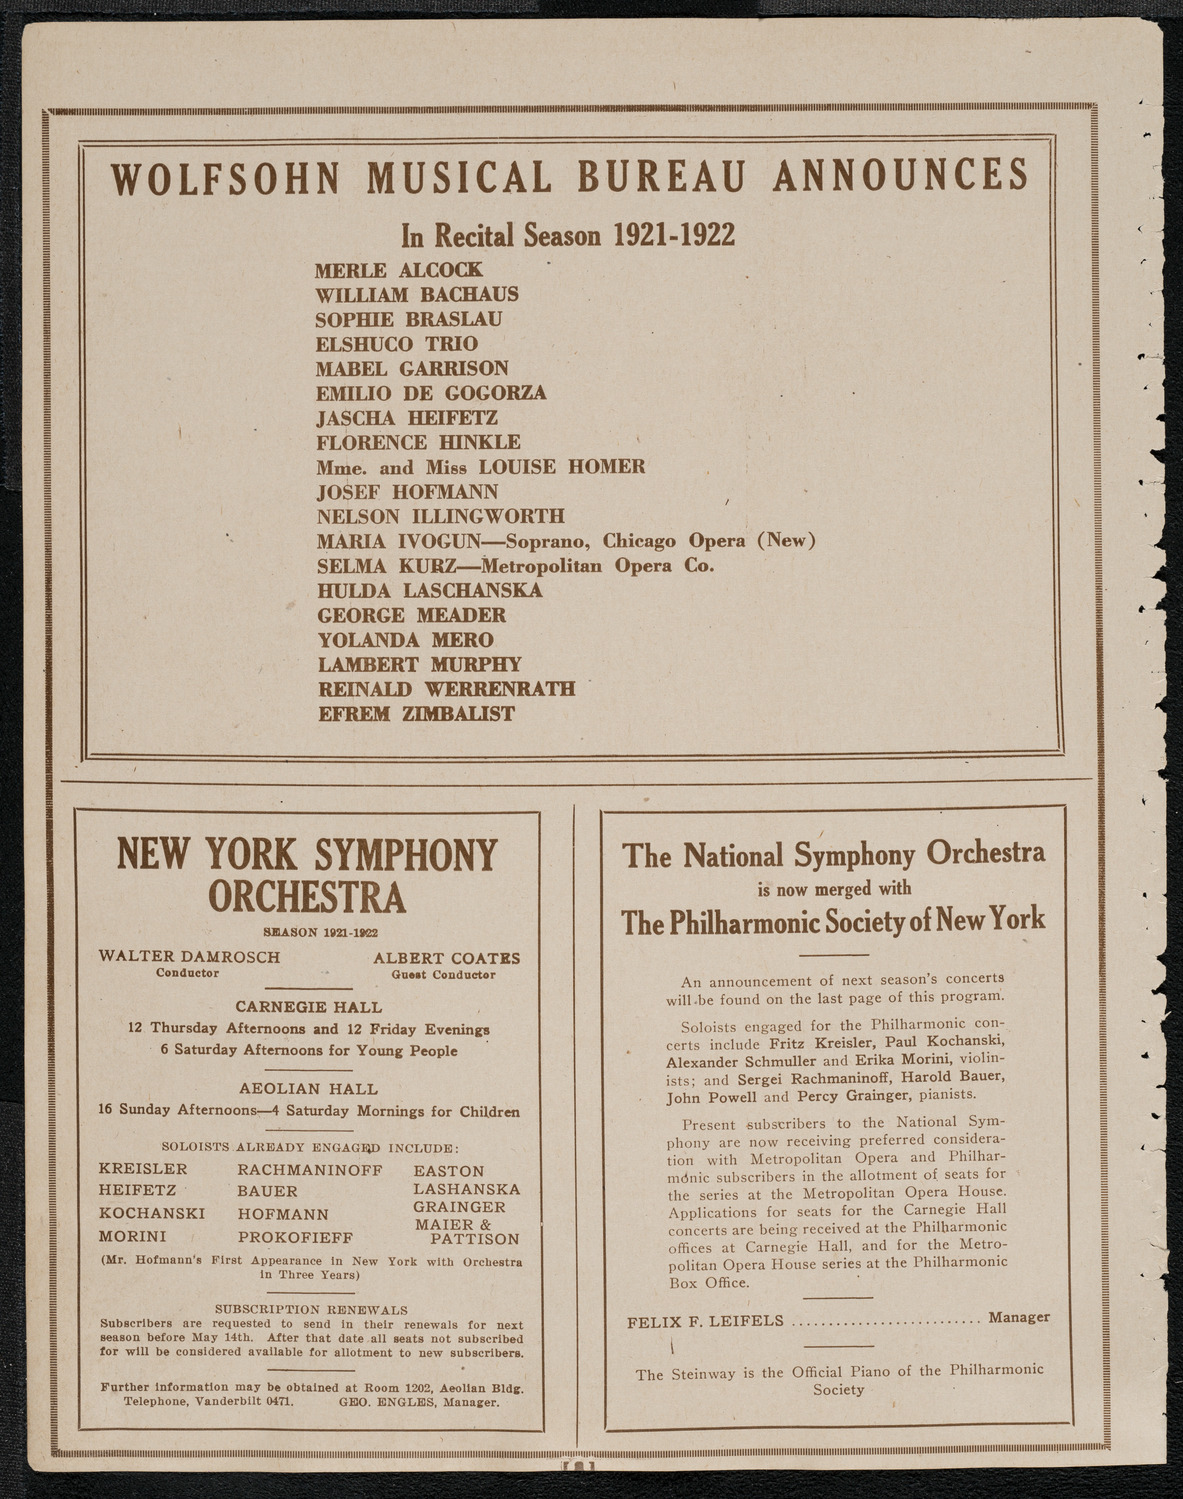 Graduation: College of Dental and Oral Surgery of New York, June 7, 1921, program page 8